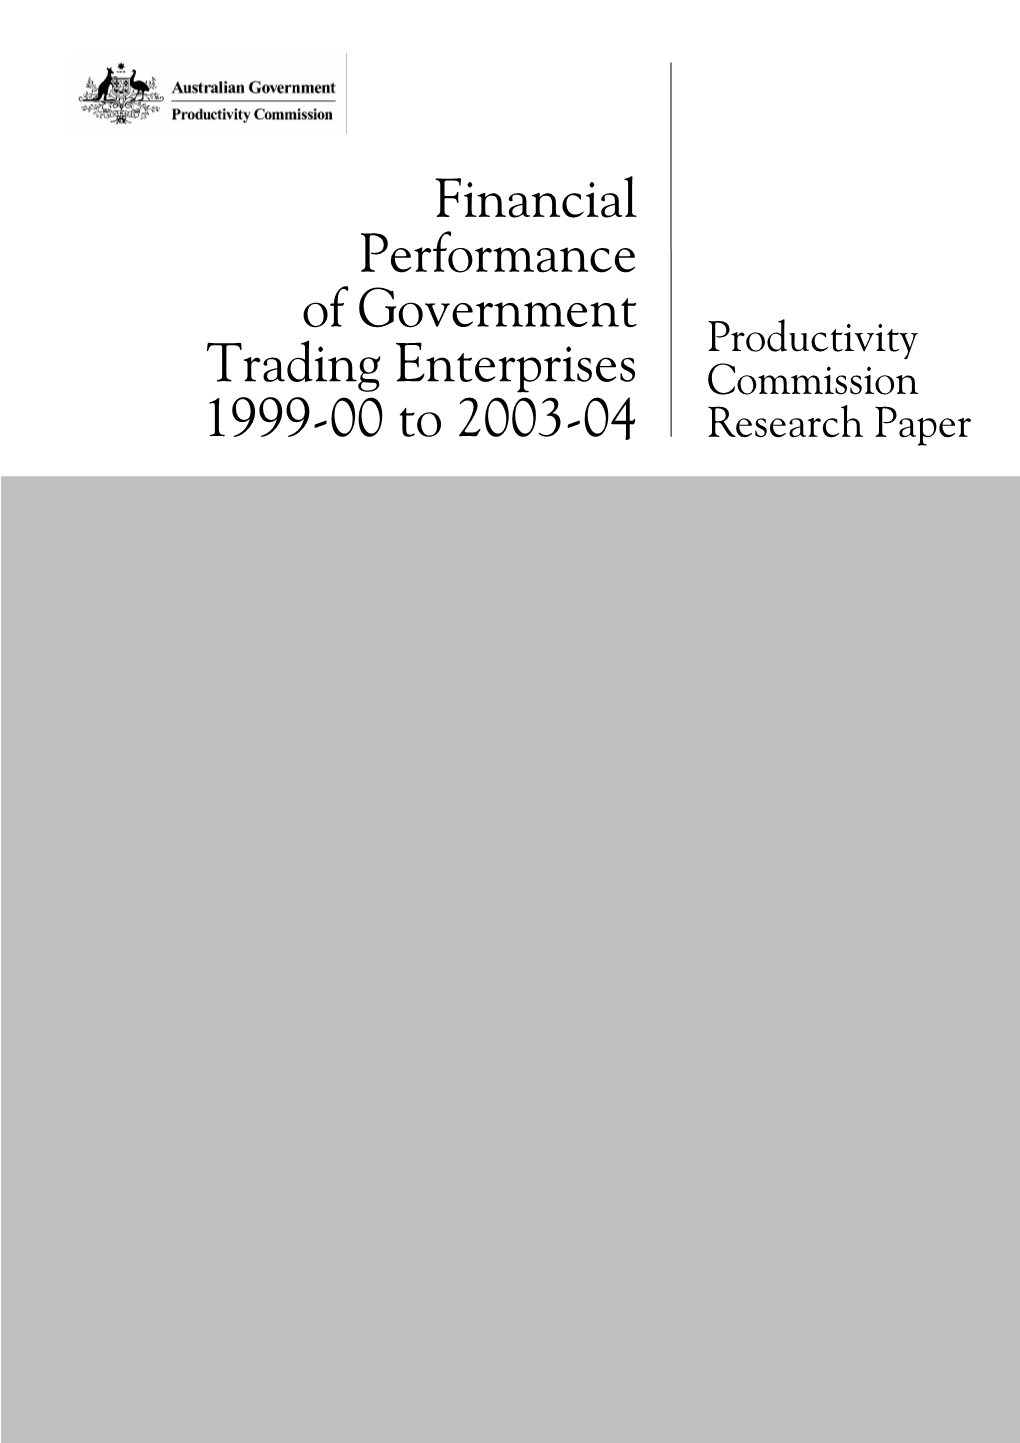 Financial Performance of Government Trading Enterprises 1999-00 To